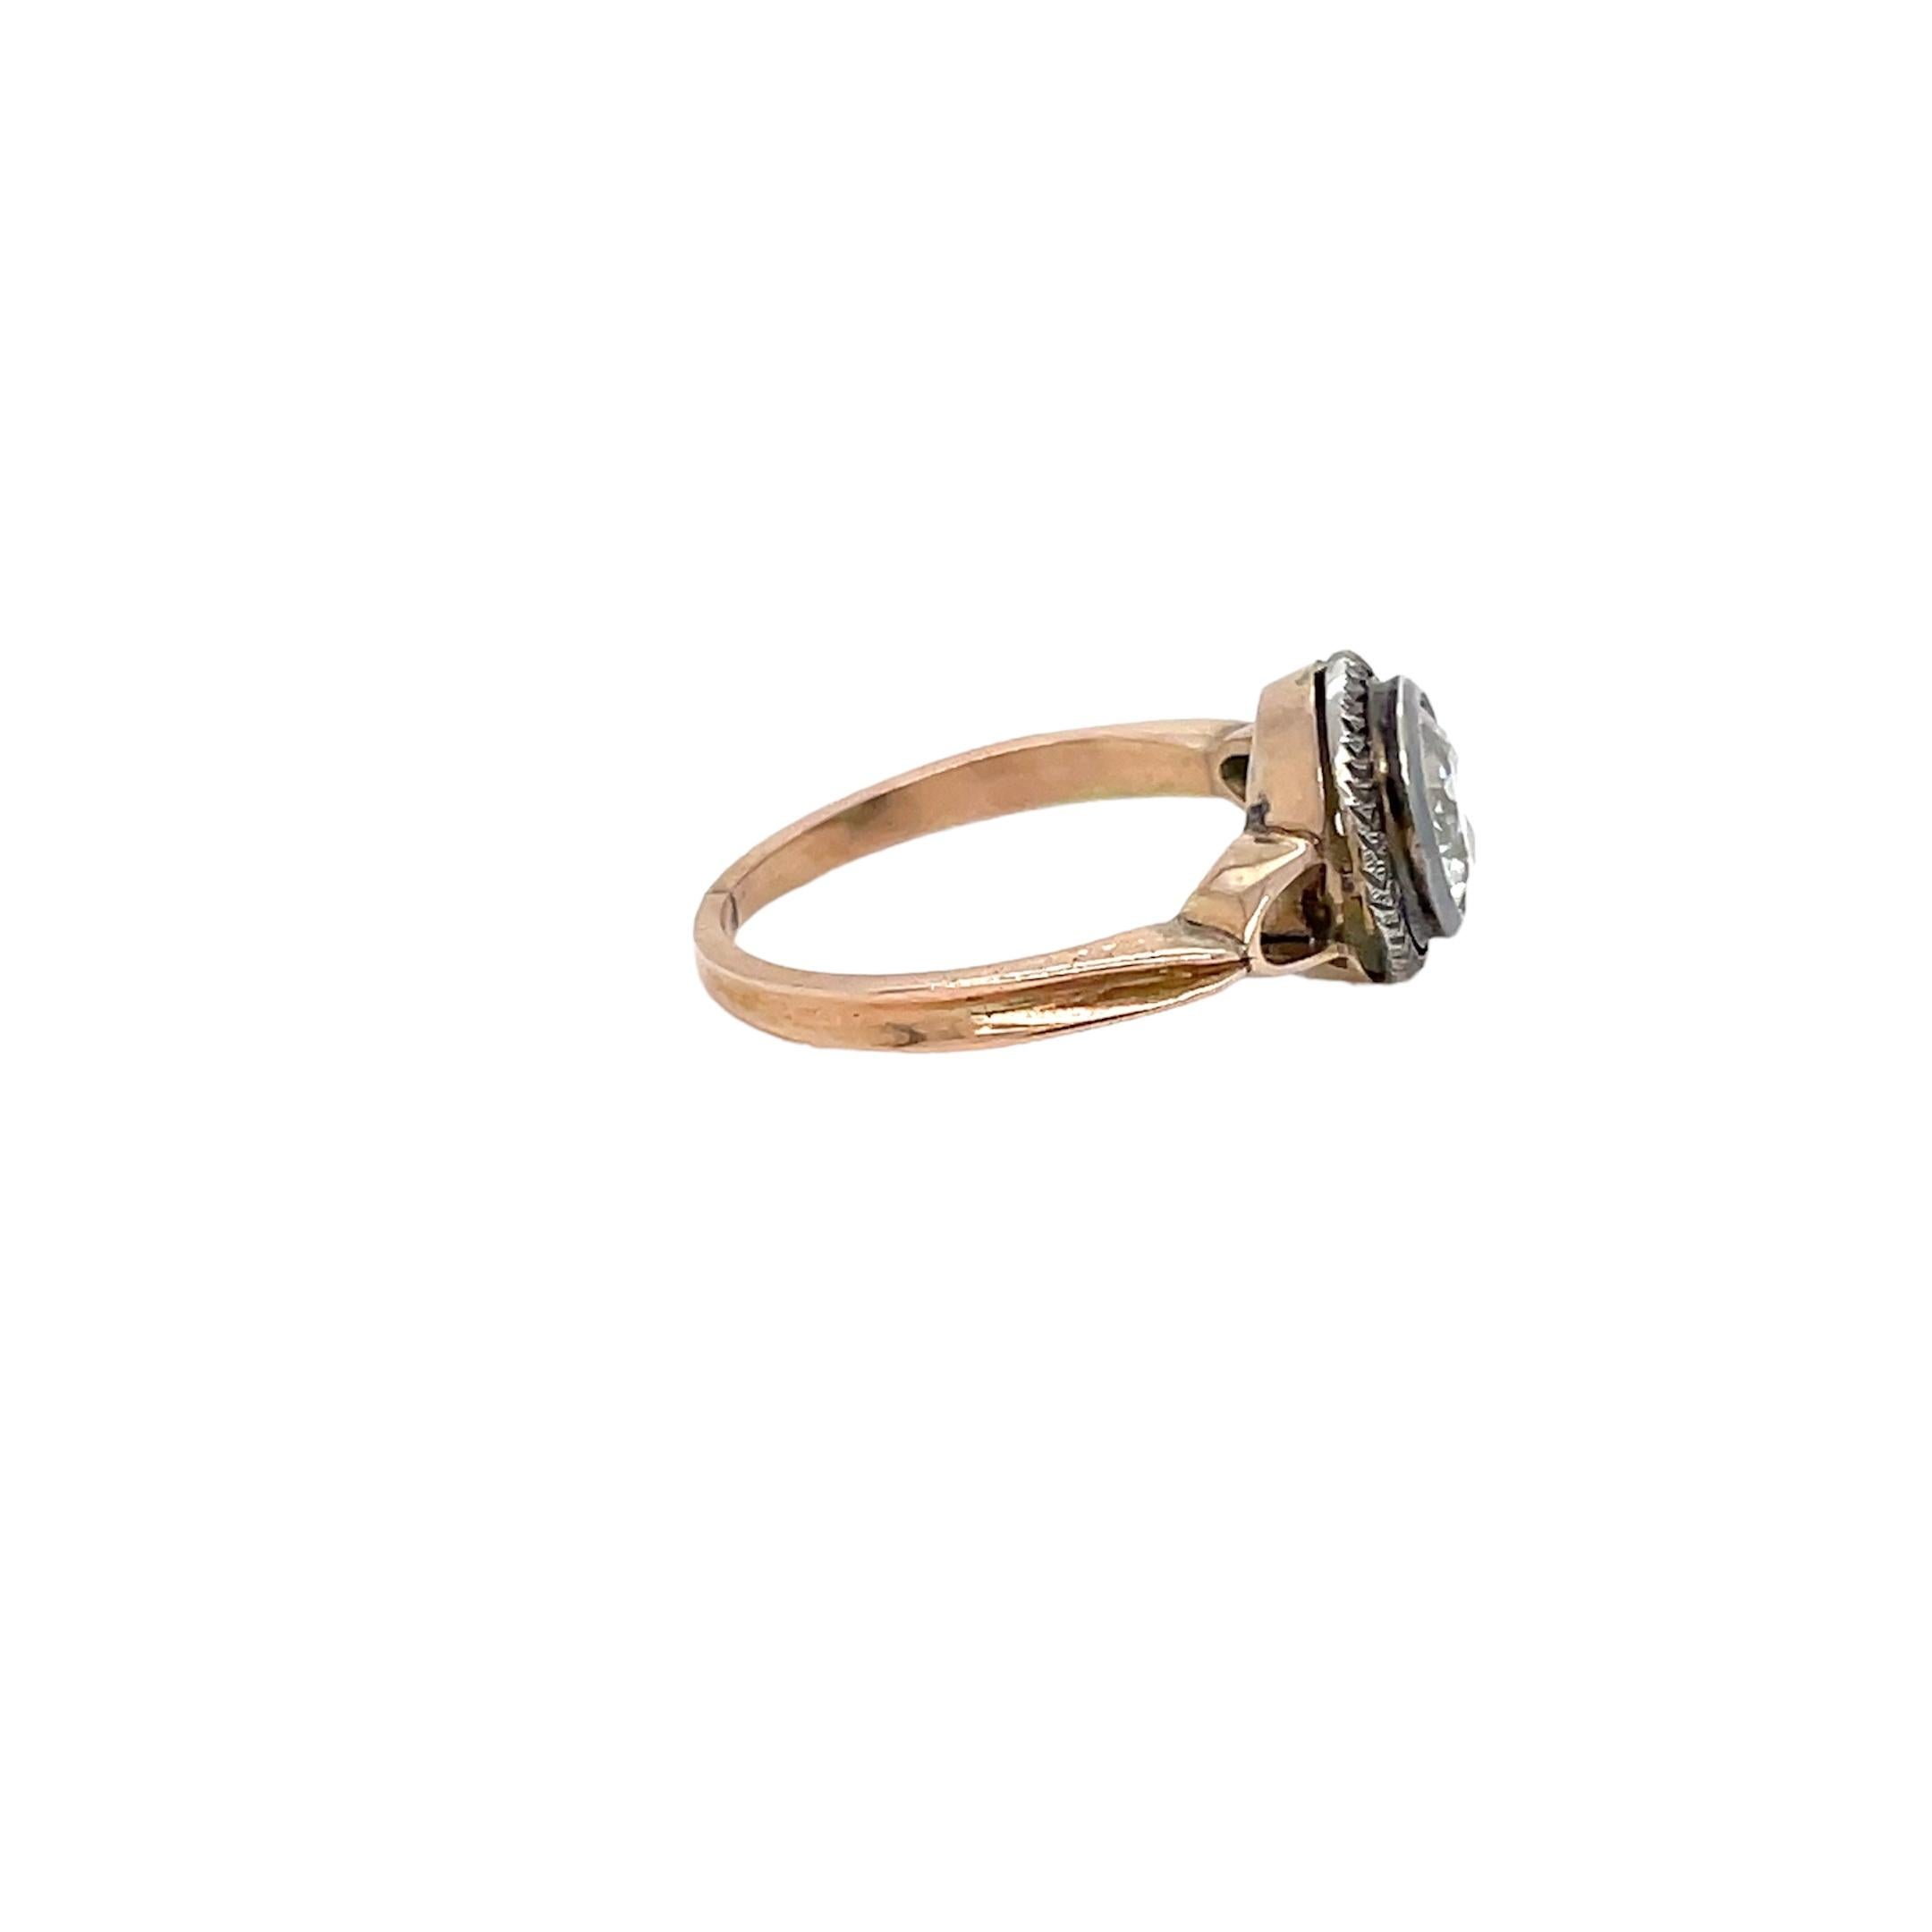 Beautiful Gold handmade genuine Belle Epoque ring.
It is set in 18k Rose Gold featuring a large sparkling Old Mine cut diamond, weight 0,90 ct. H color SI clarity. The diamond is held by a hand-engraved silver circle which makes the jewel even more